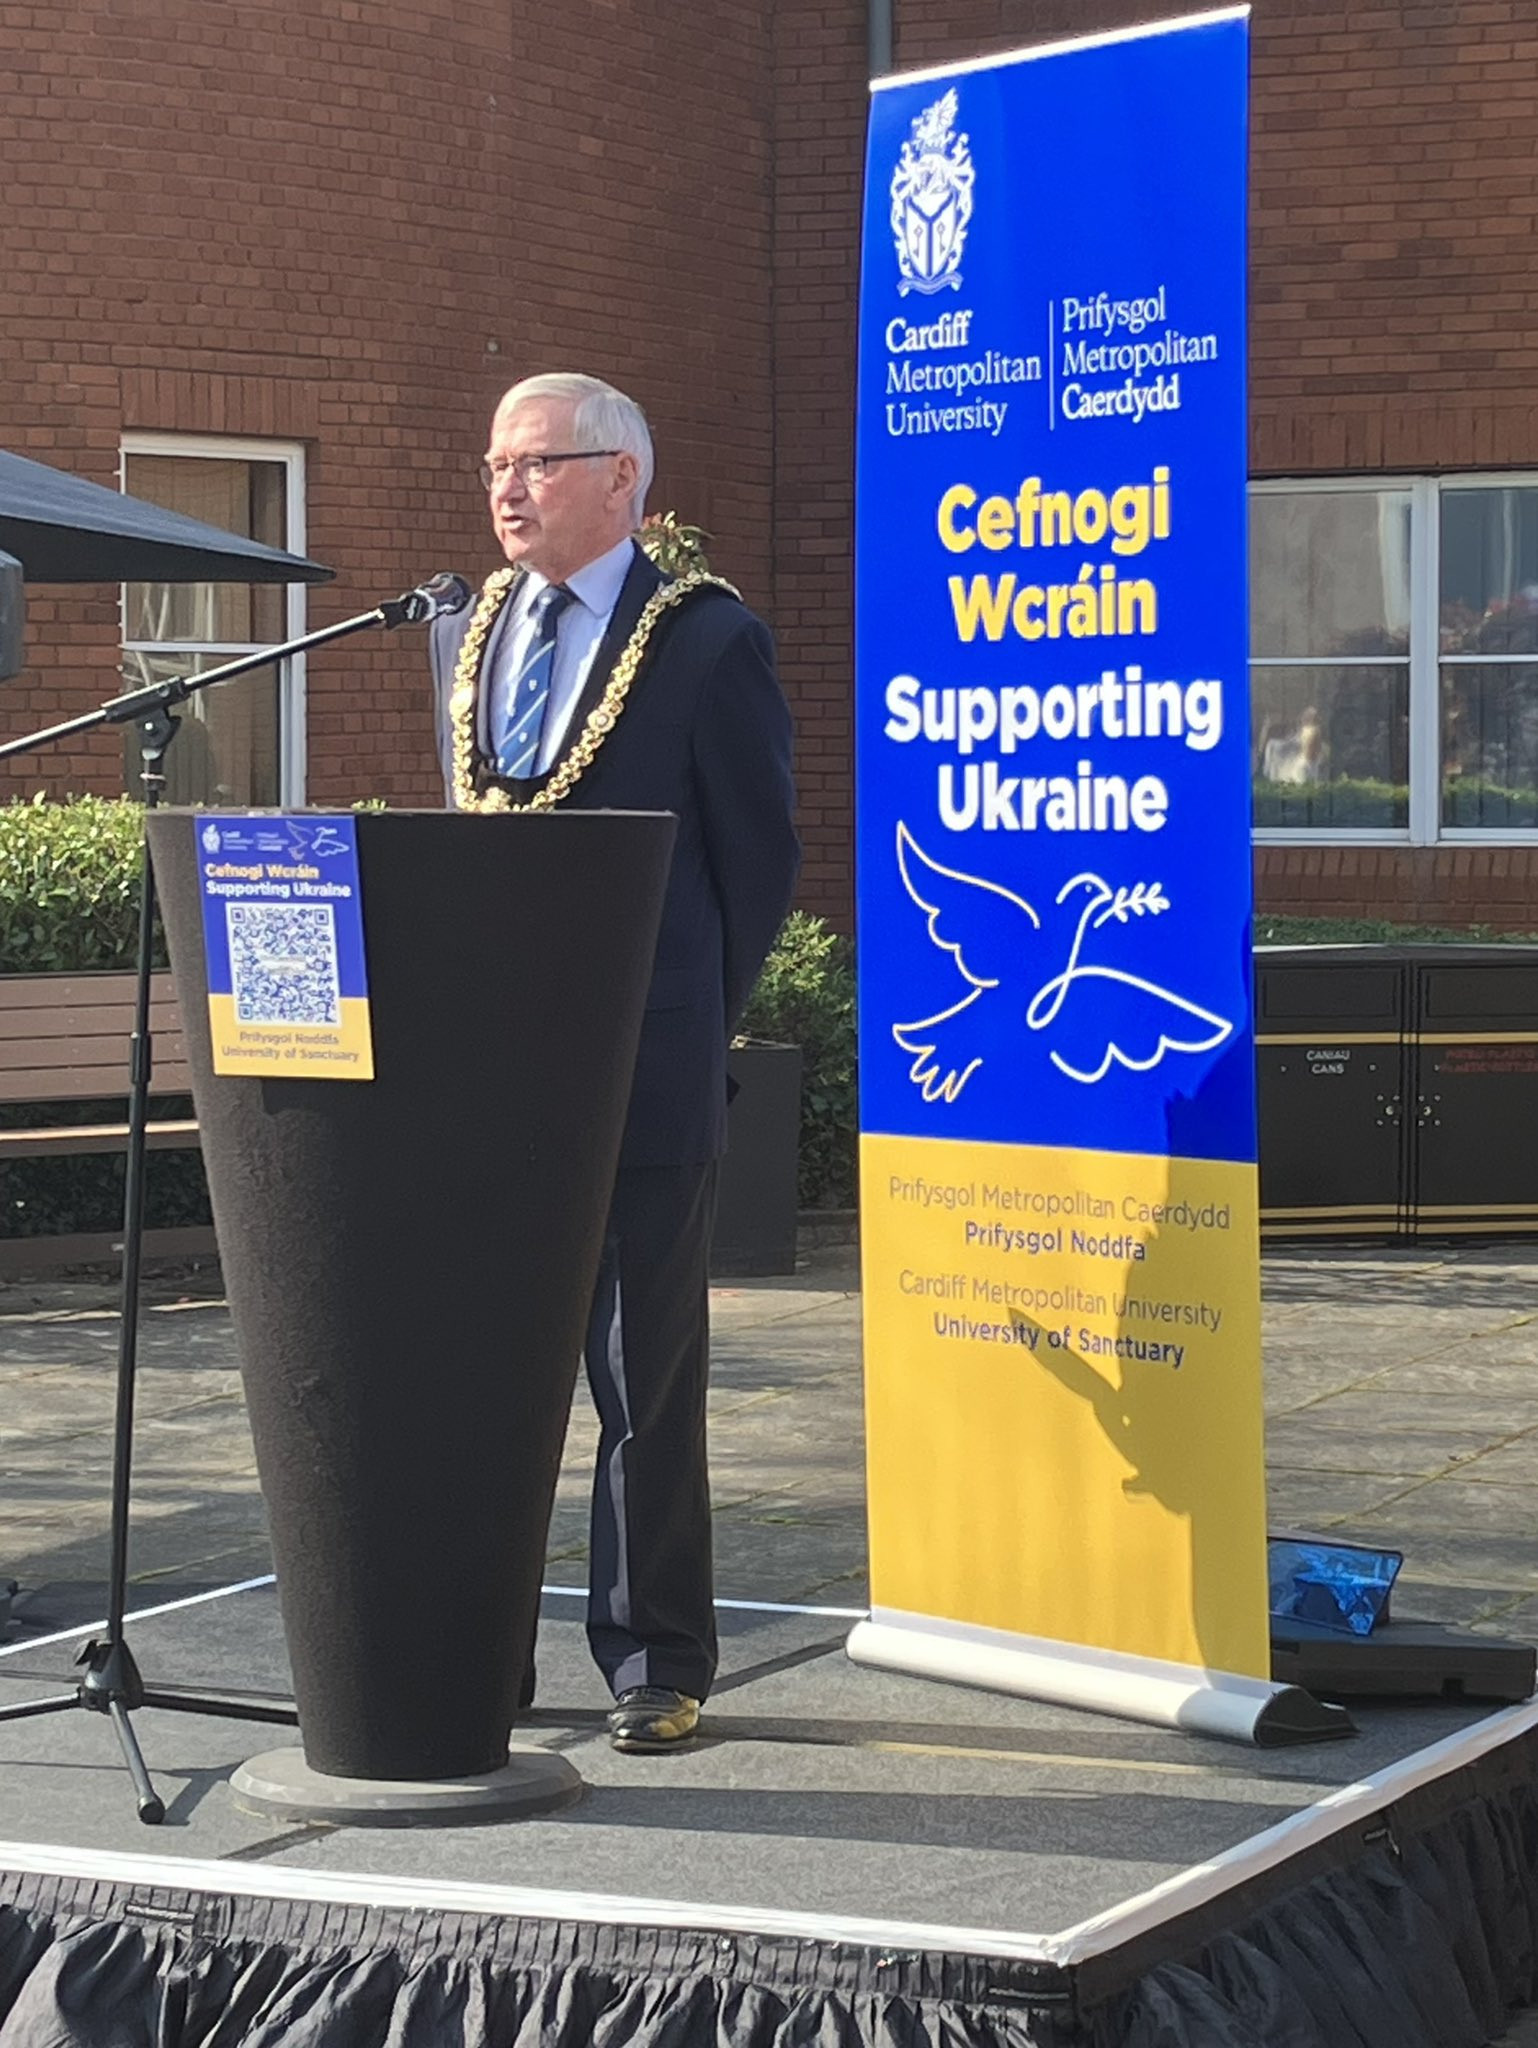 Cardiff Metropolitan University is supporting Ukraine's athletes in their preparations for Paris 2024 as part of initiative between British and Ukrainian institutions ©Twitter